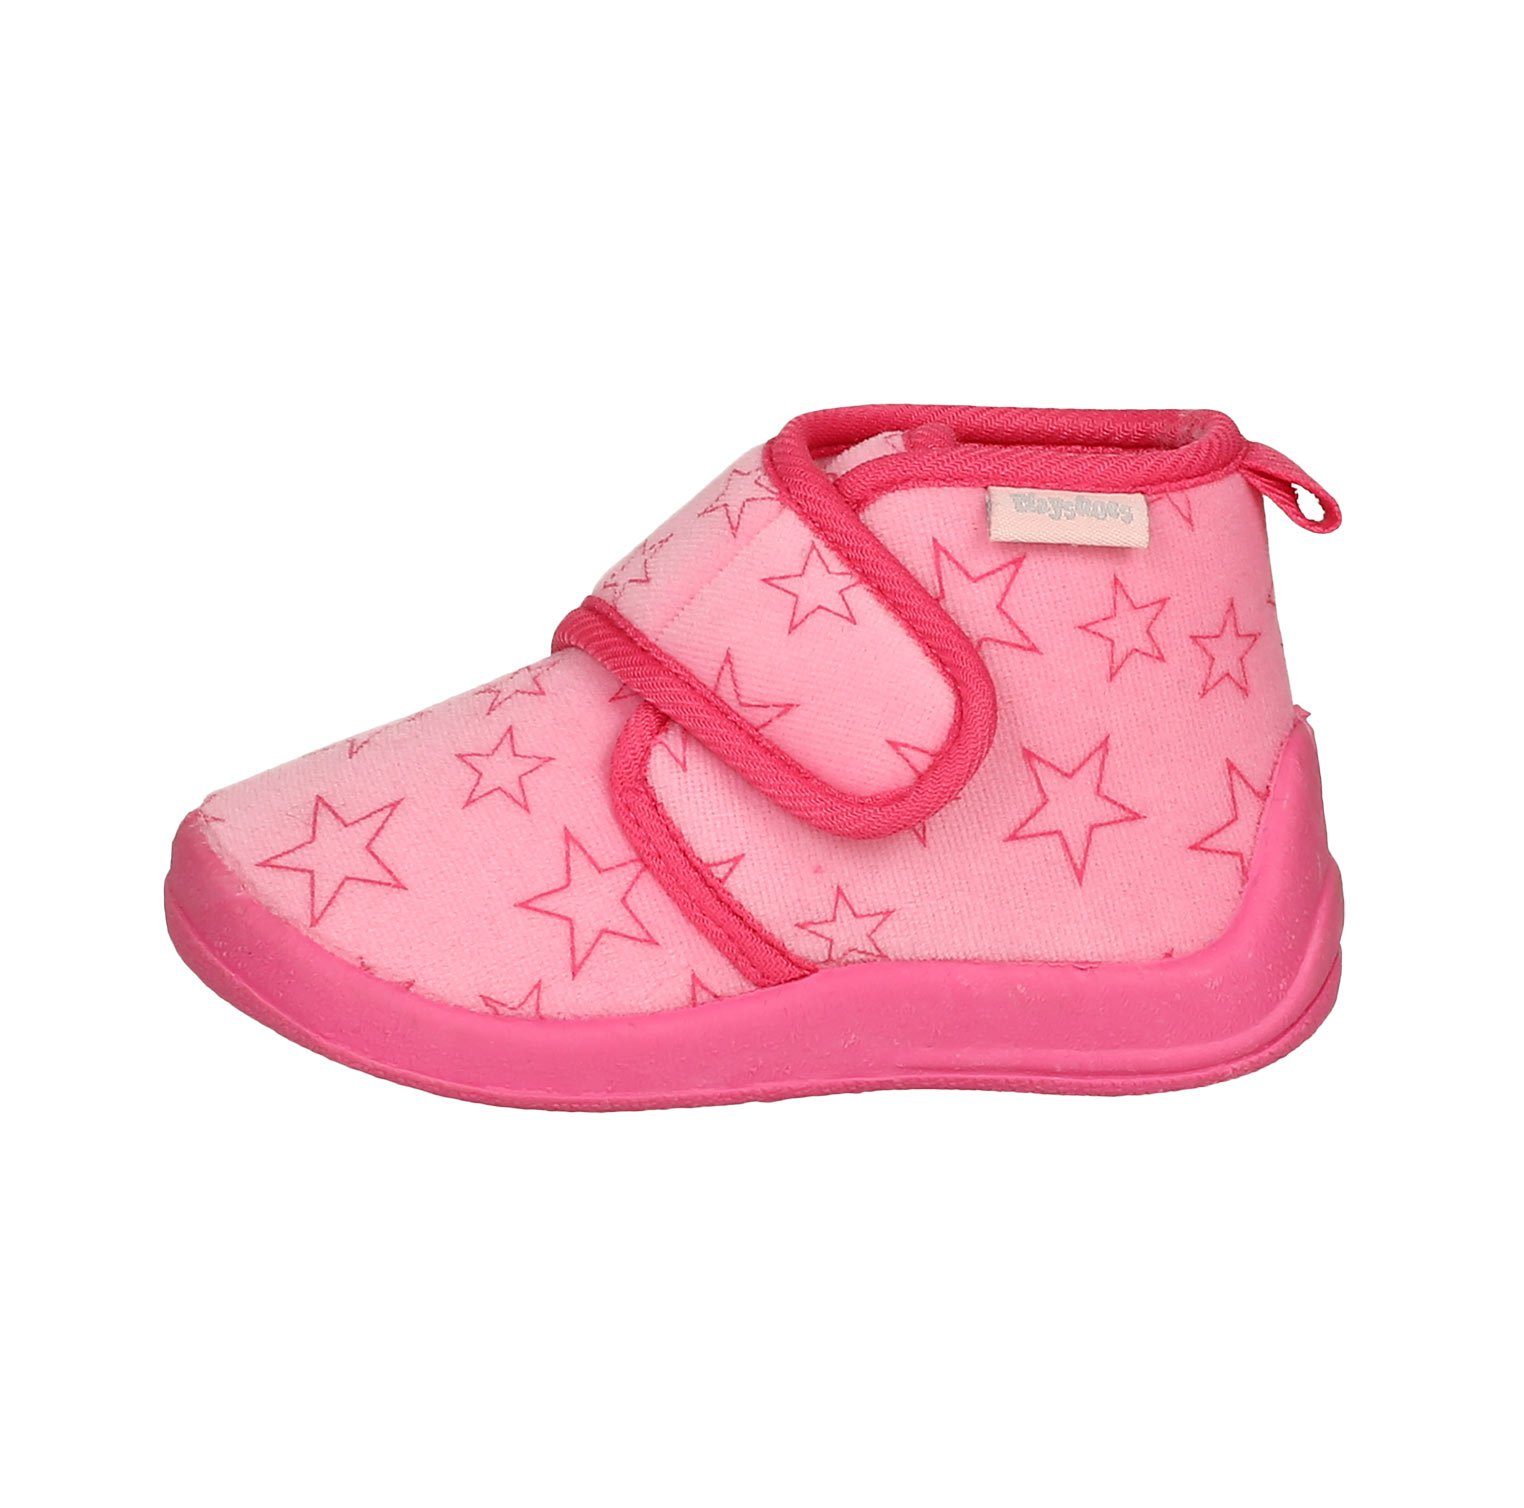 Rosa Pastell Hausschuh Hausschuh Playshoes